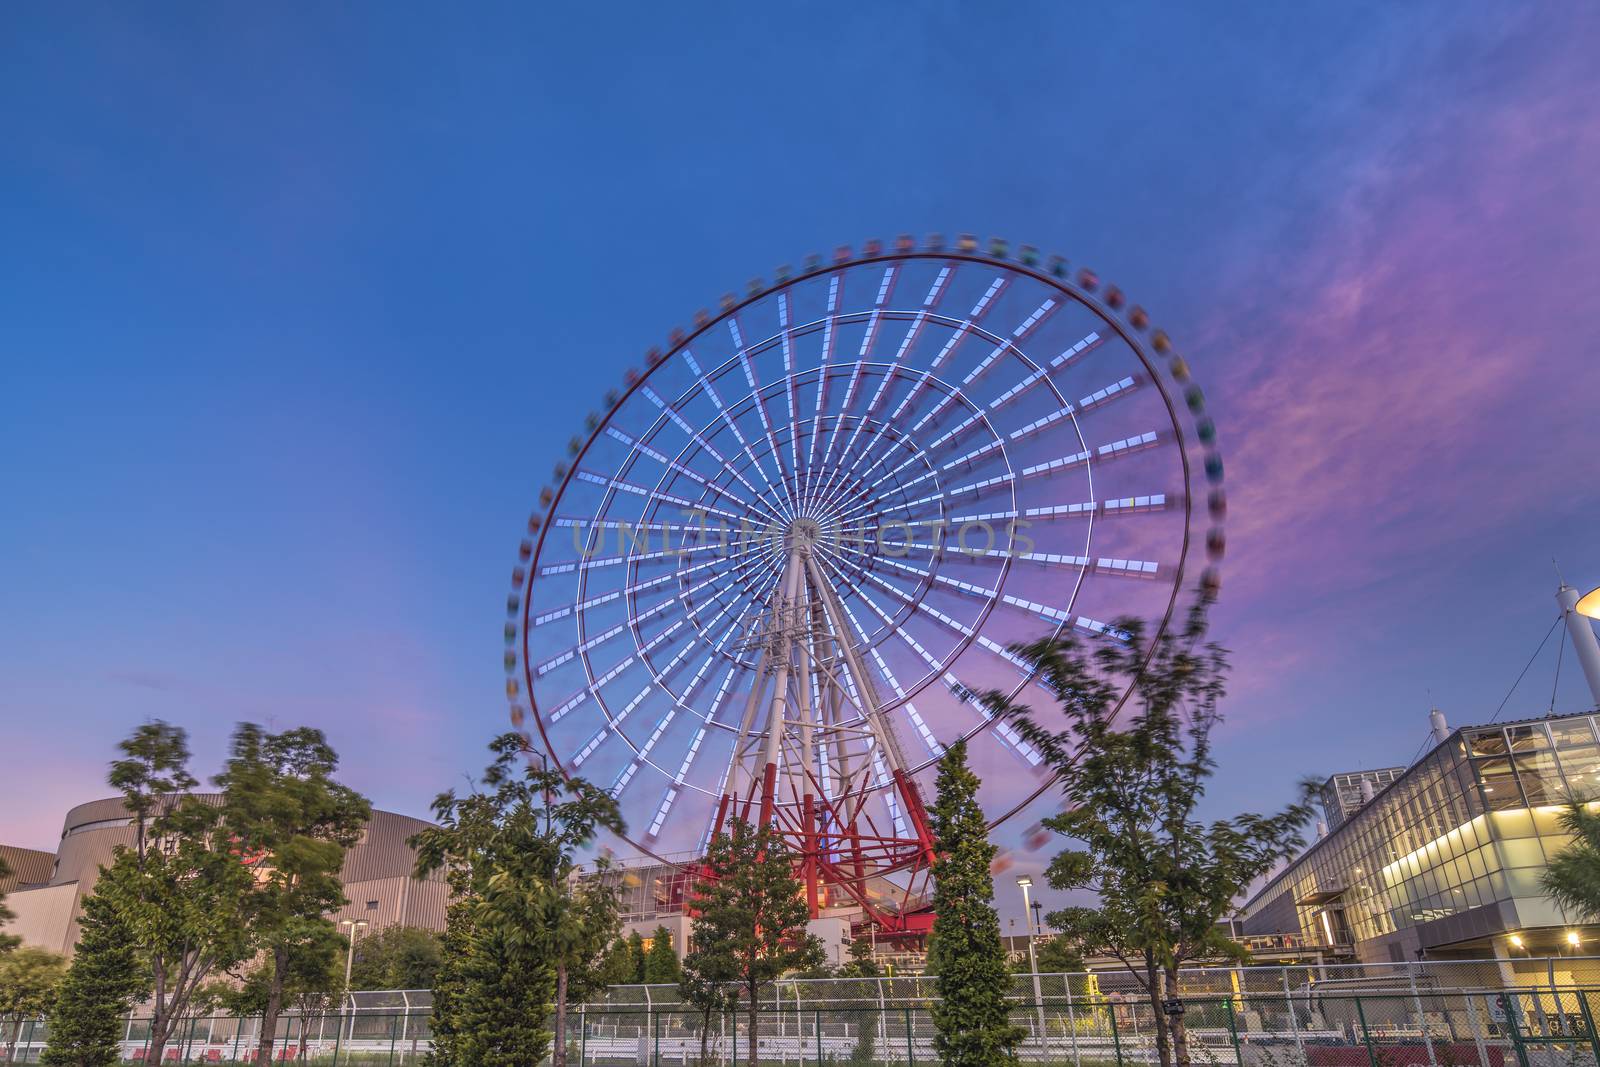 Odaiba colorful tall Palette Town Ferris wheel named Daikanransha visible from the central urban area of Tokyo in the summer sunset purple blue sky. Passengers can see the Tokyo Tower, the twin-deck Rainbow Bridge, and Haneda Airport, as well as central Tokyo during their ride.